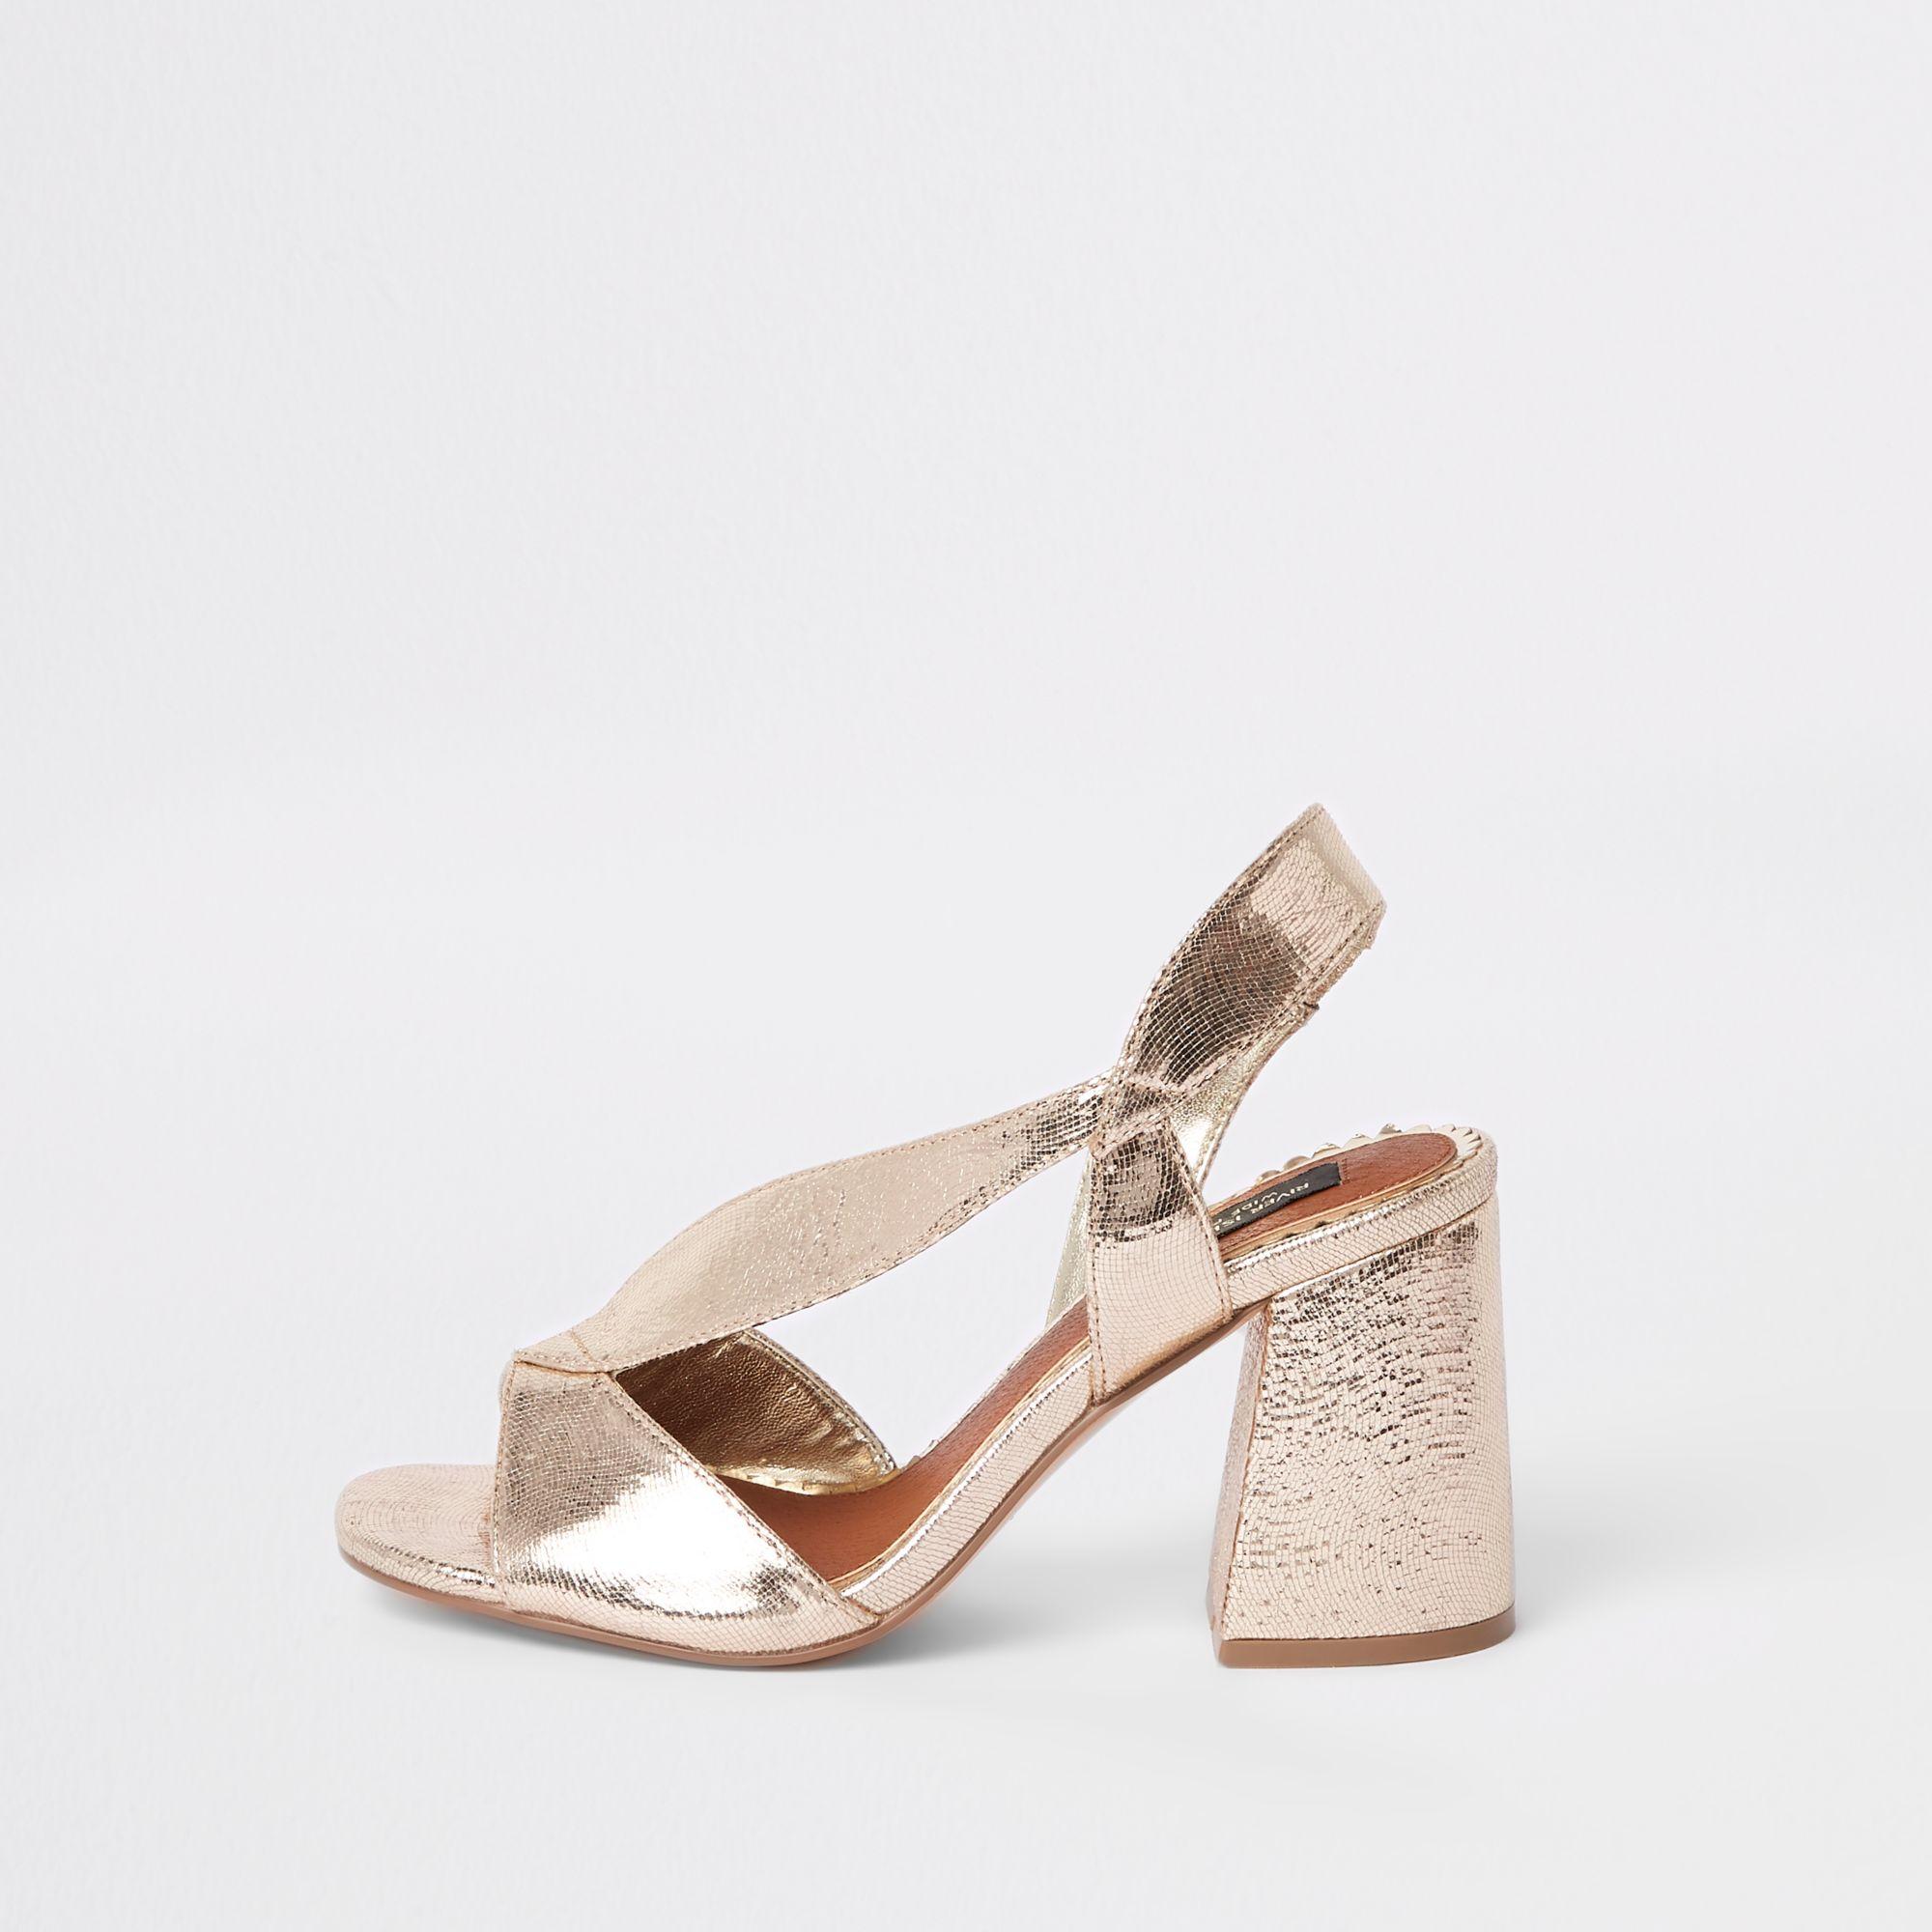 River Island Wide Fit Heeled Sandals in Gold (Metallic) | Lyst